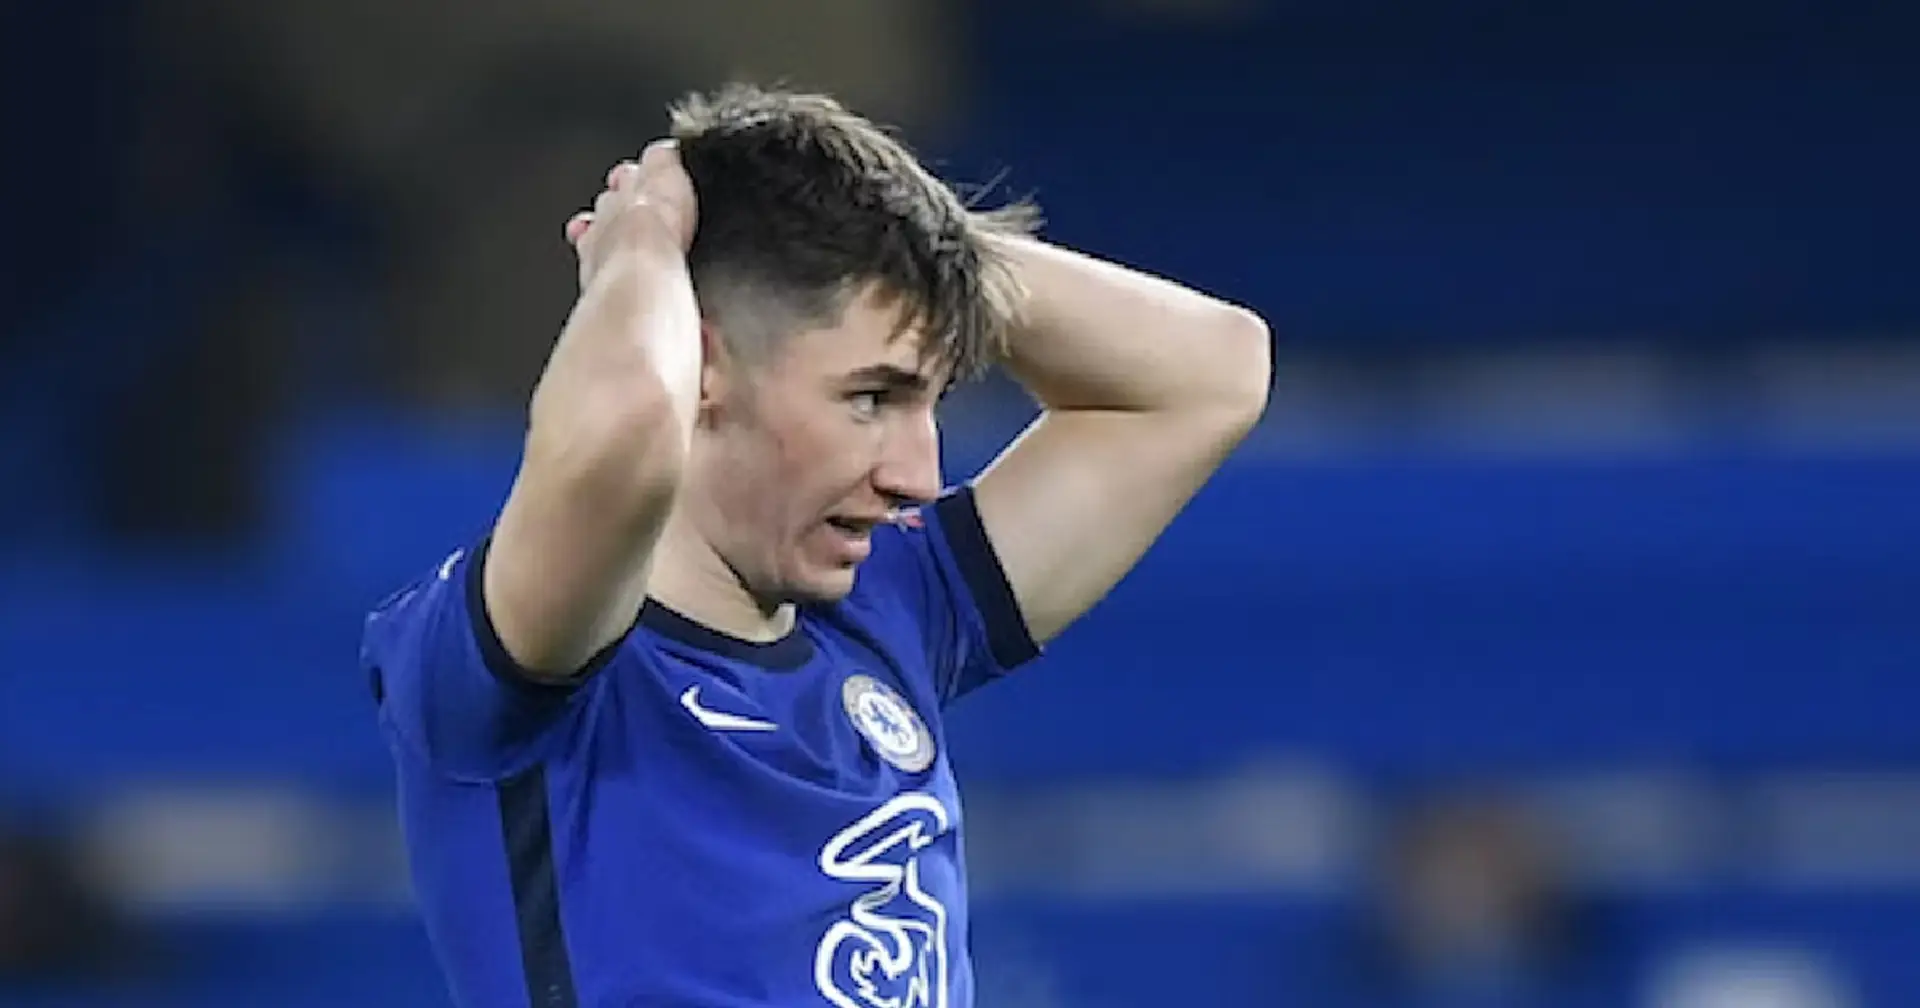 'I want to be at a club that appreciates me': Billy Gilmour details how Tuchel ended his Chelsea dream